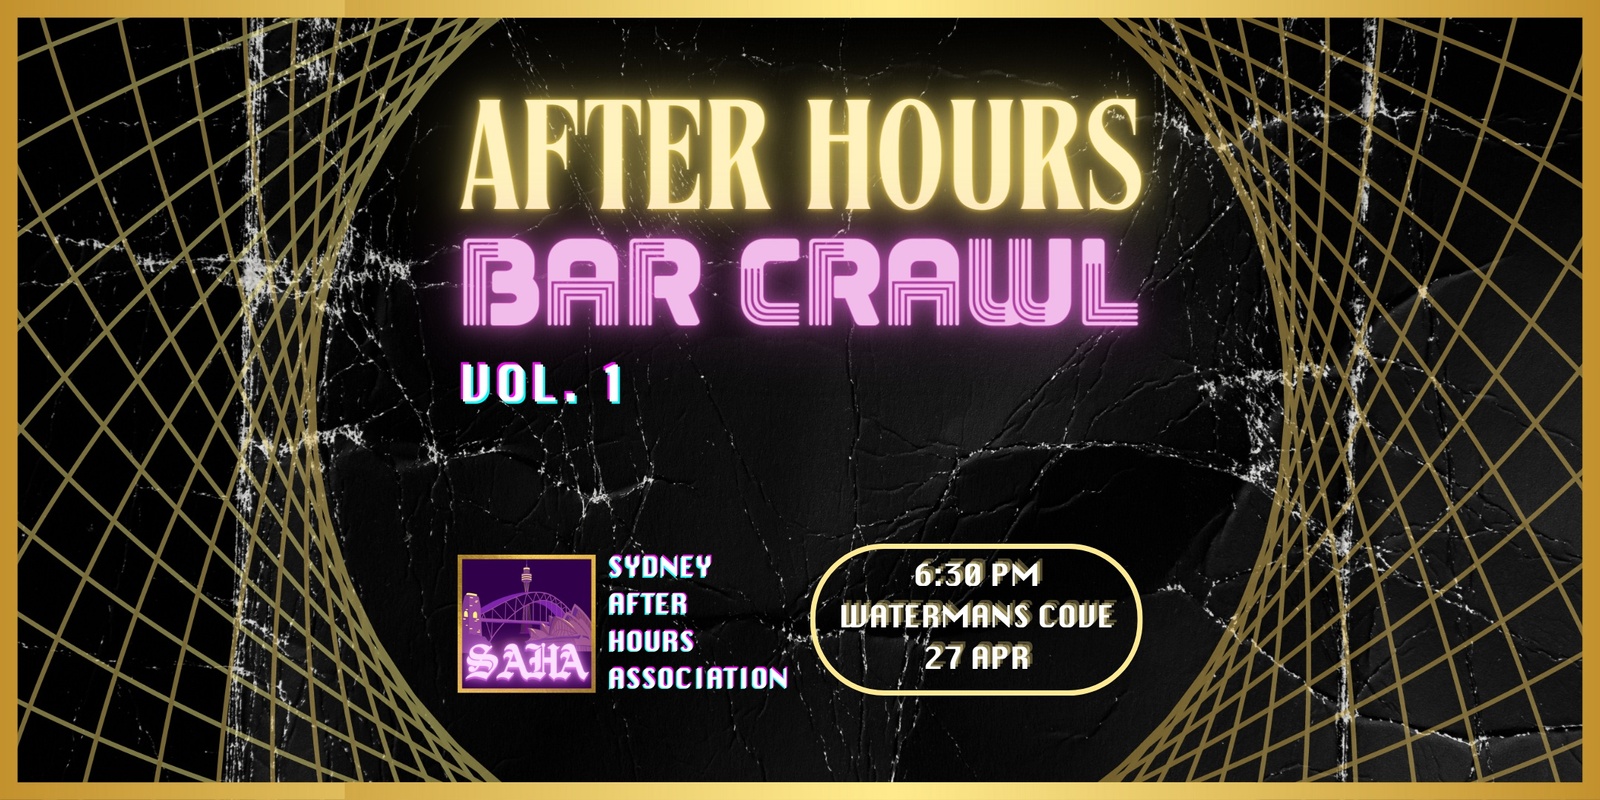 Banner image for AFTER HOURS BAR CRAWL VOL.1